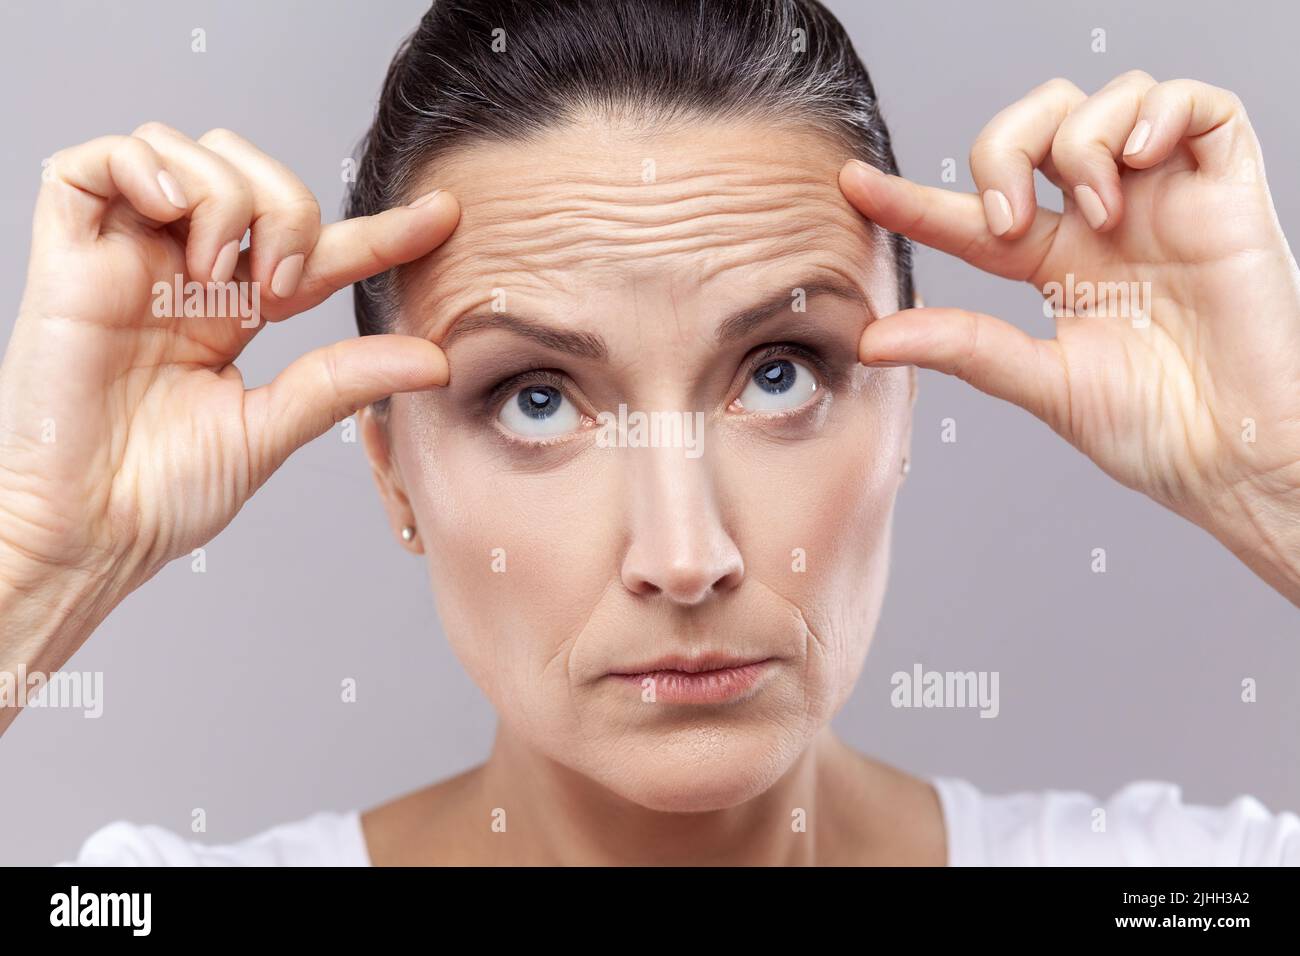 Closeup portrait of middle aged woman checking wrinkles, doing anti aging face yoga exercises to firm and tighten skin and relax muscles on her forehead. Indoor studio shot isolated on gray background Stock Photo